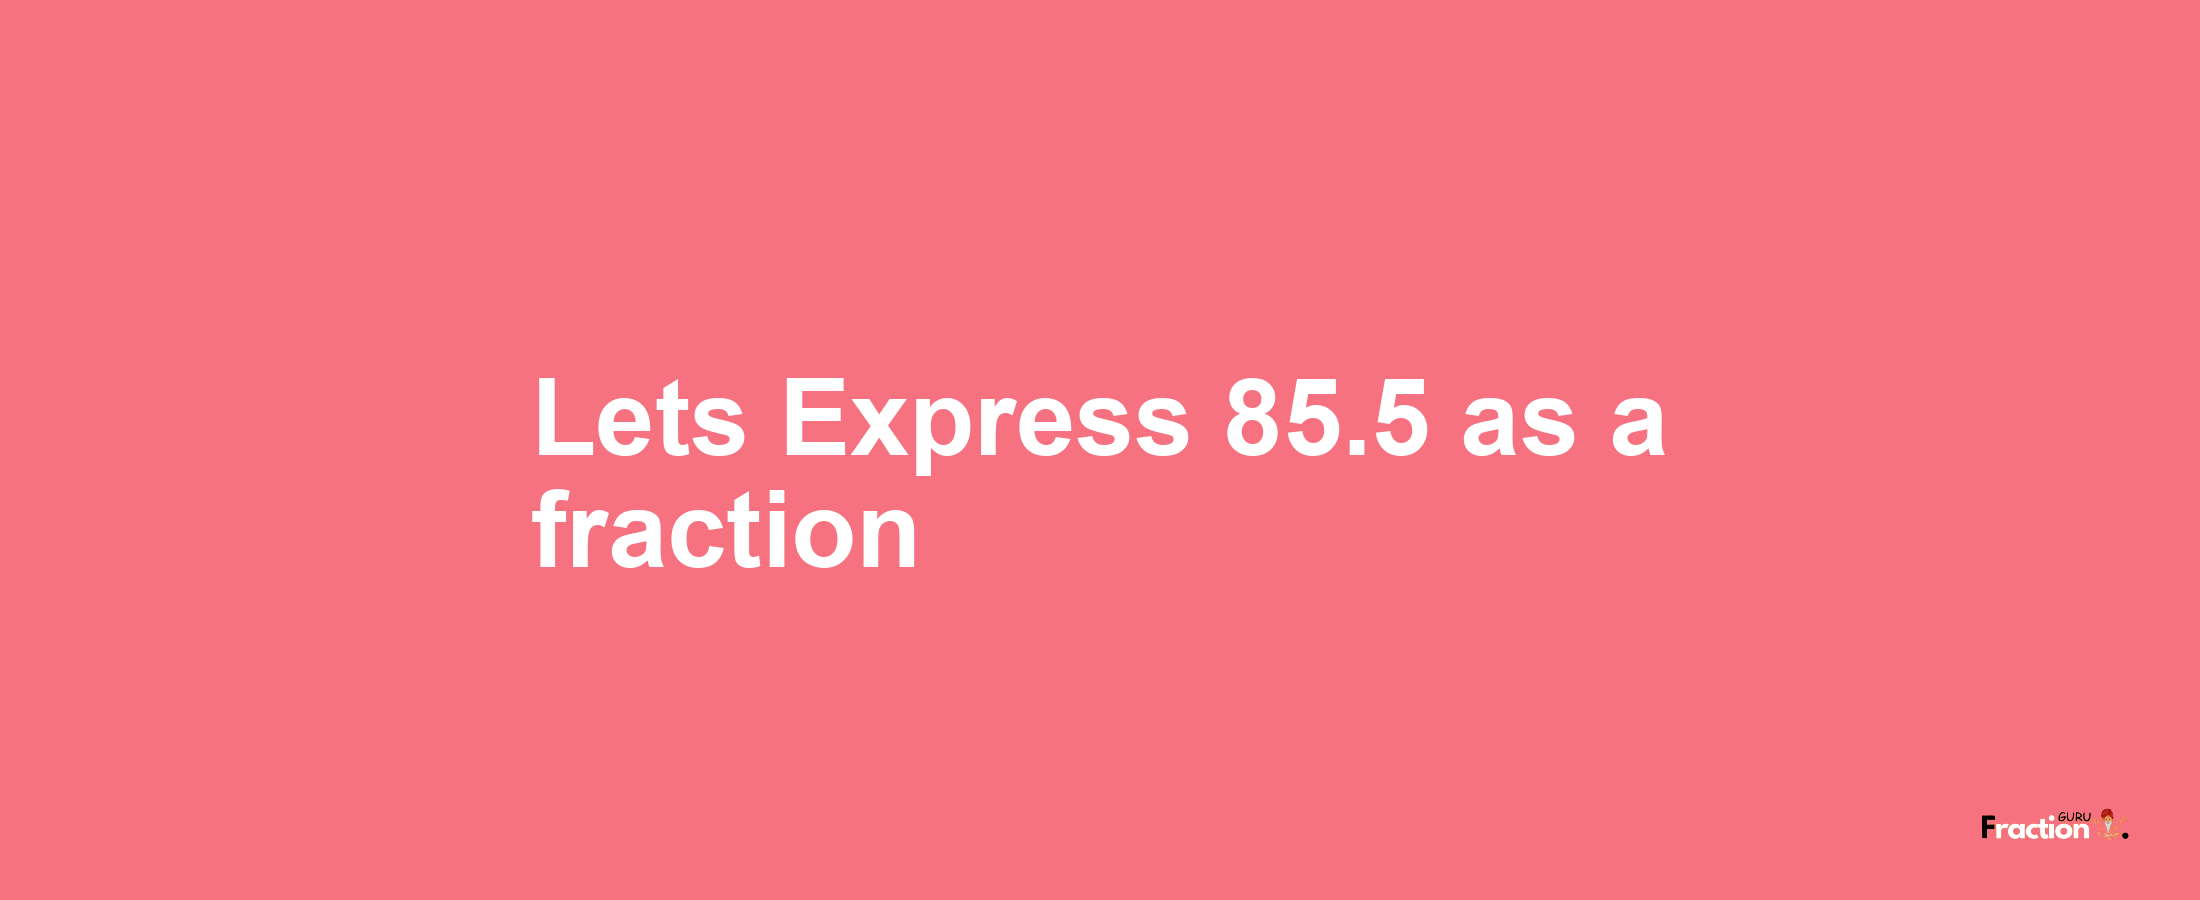 Lets Express 85.5 as afraction